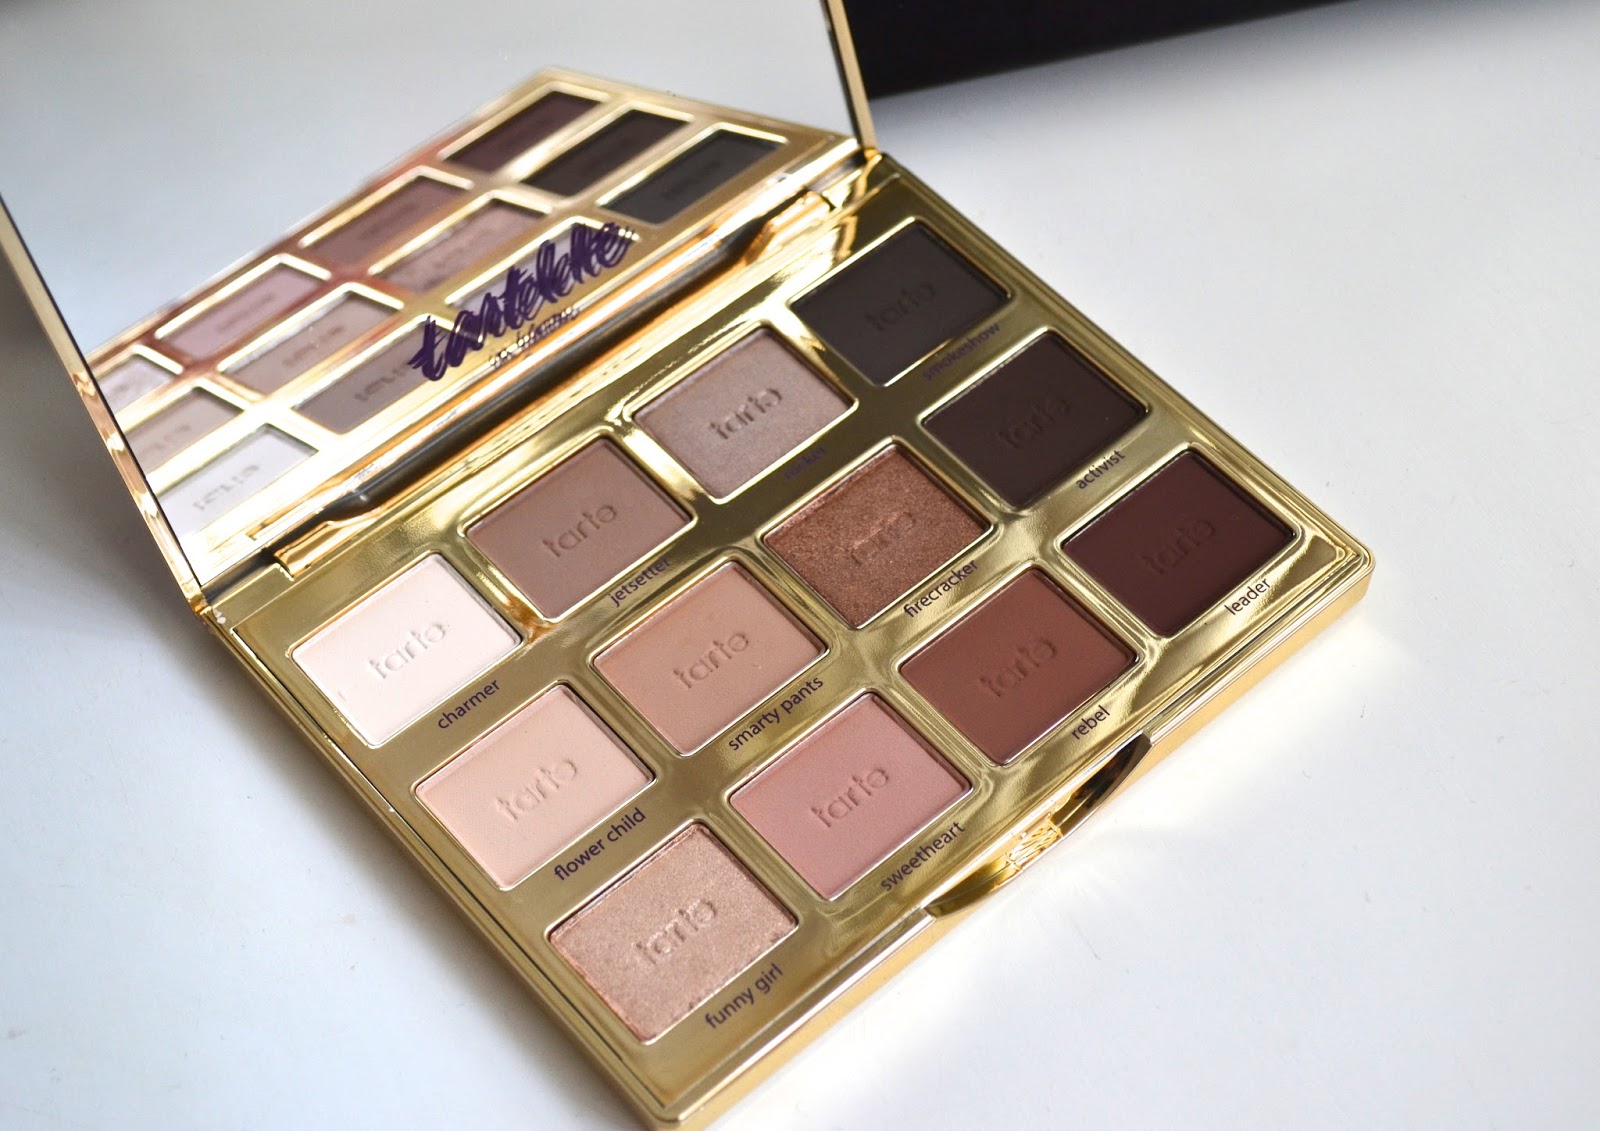 Tarte Tartelette In Bloom Clay Palette - Swatches and Review.